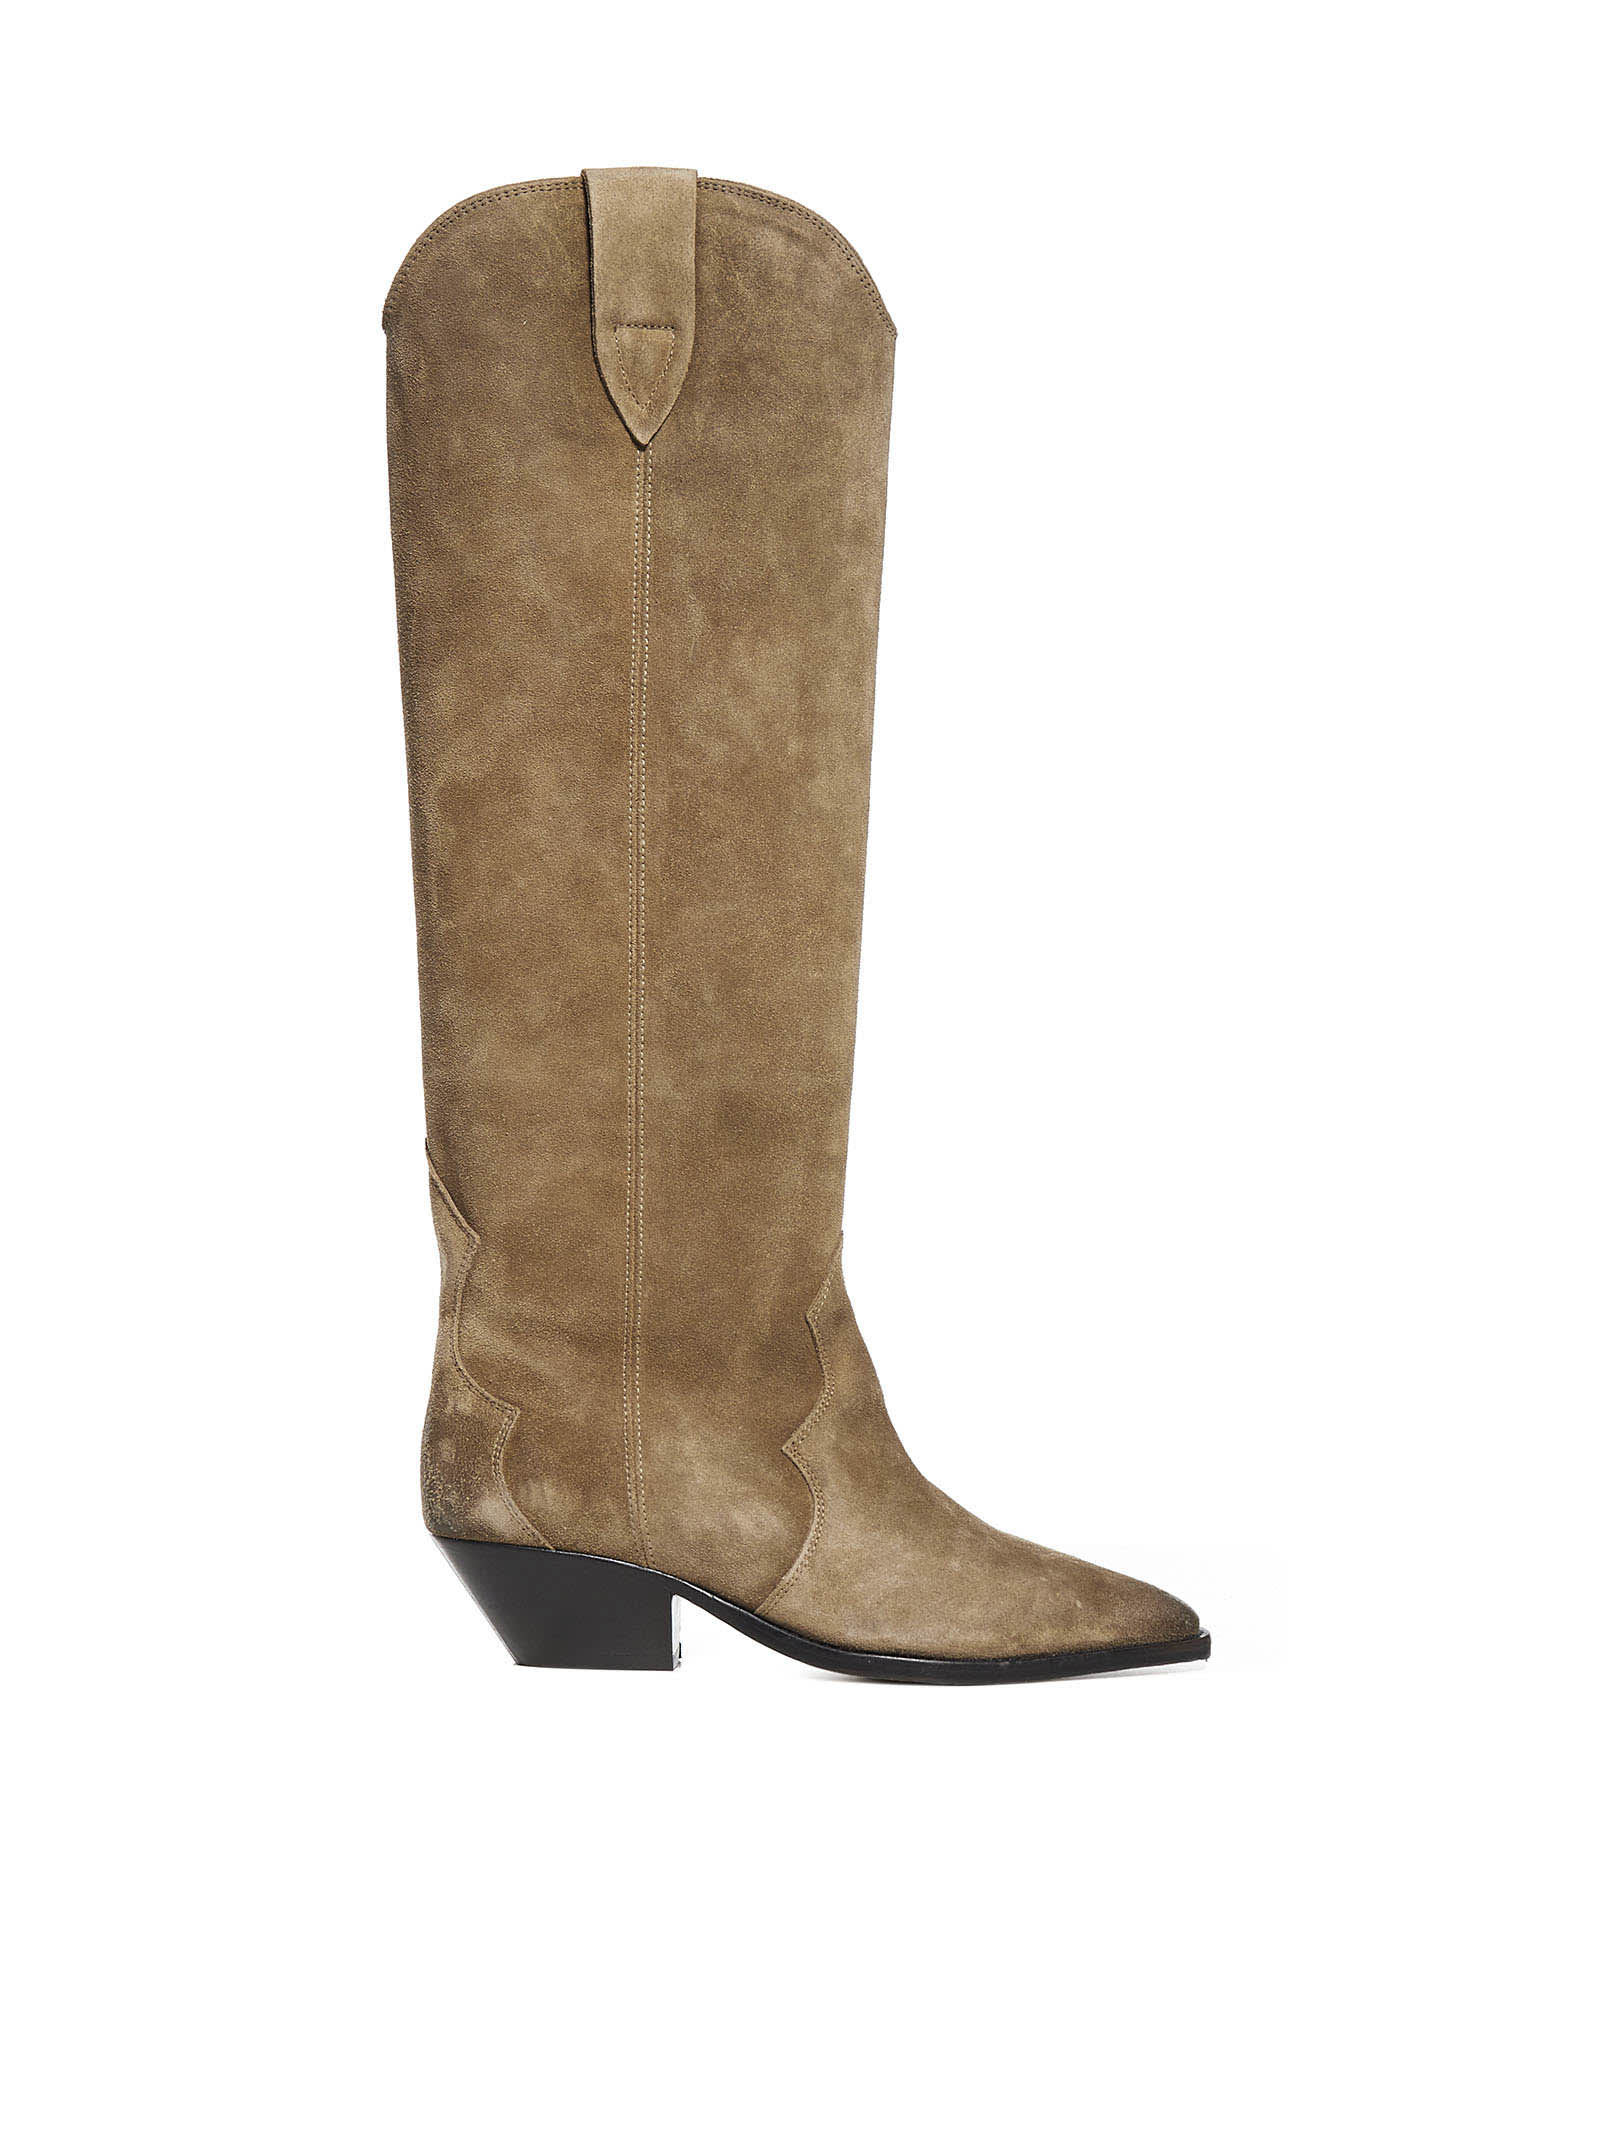 isabel marant suede boots